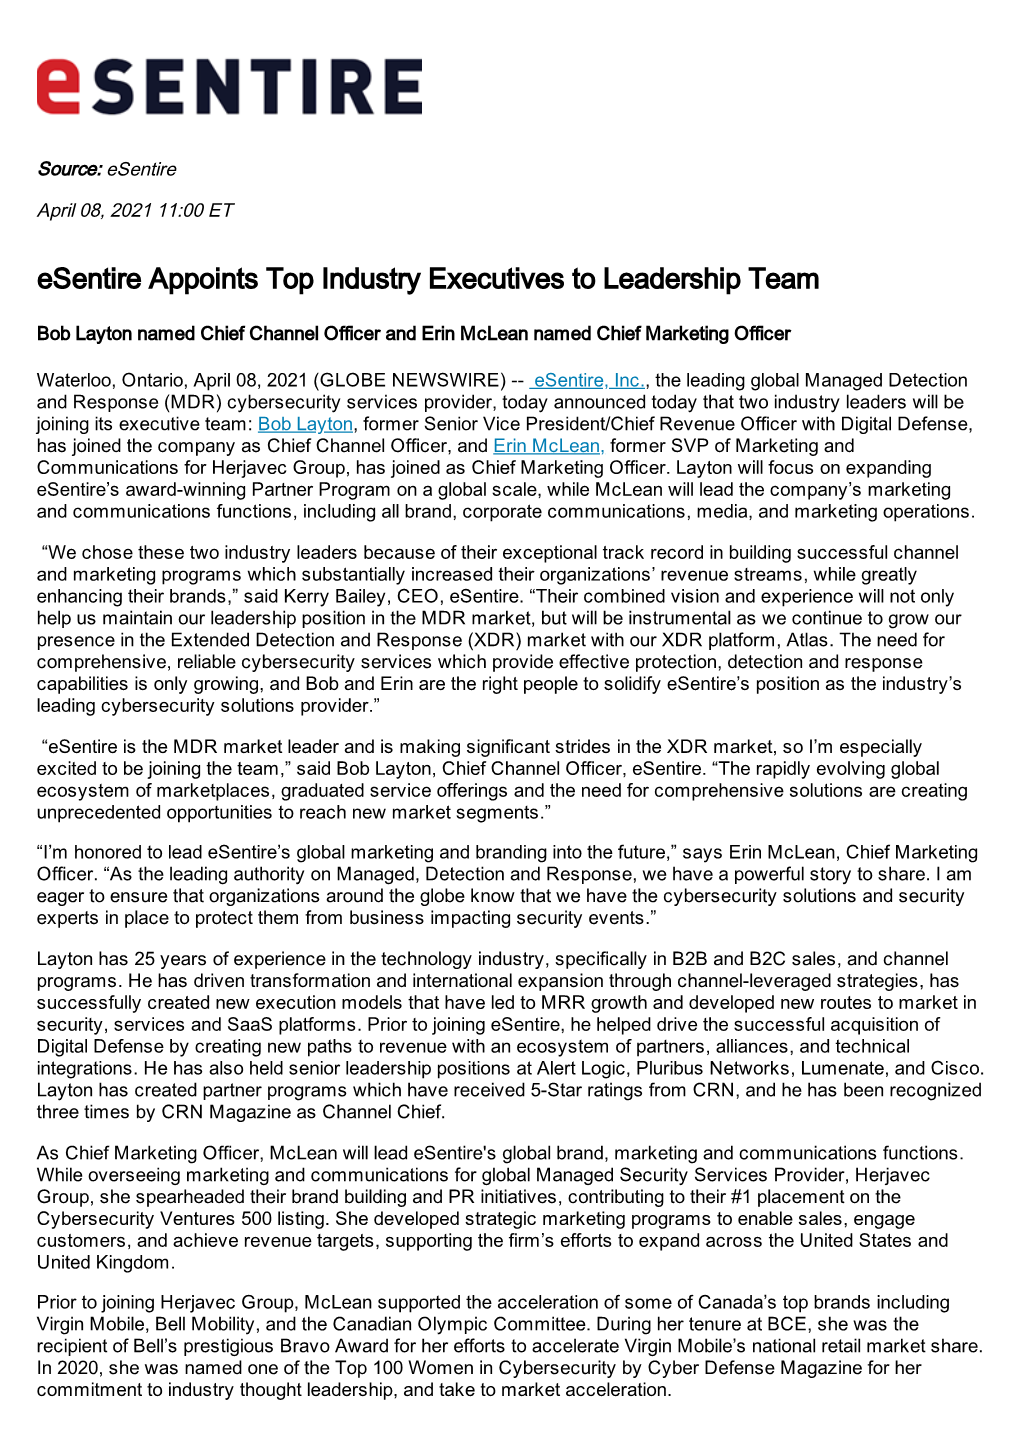 Esentire Appoints Top Industry Executives to Leadership Team